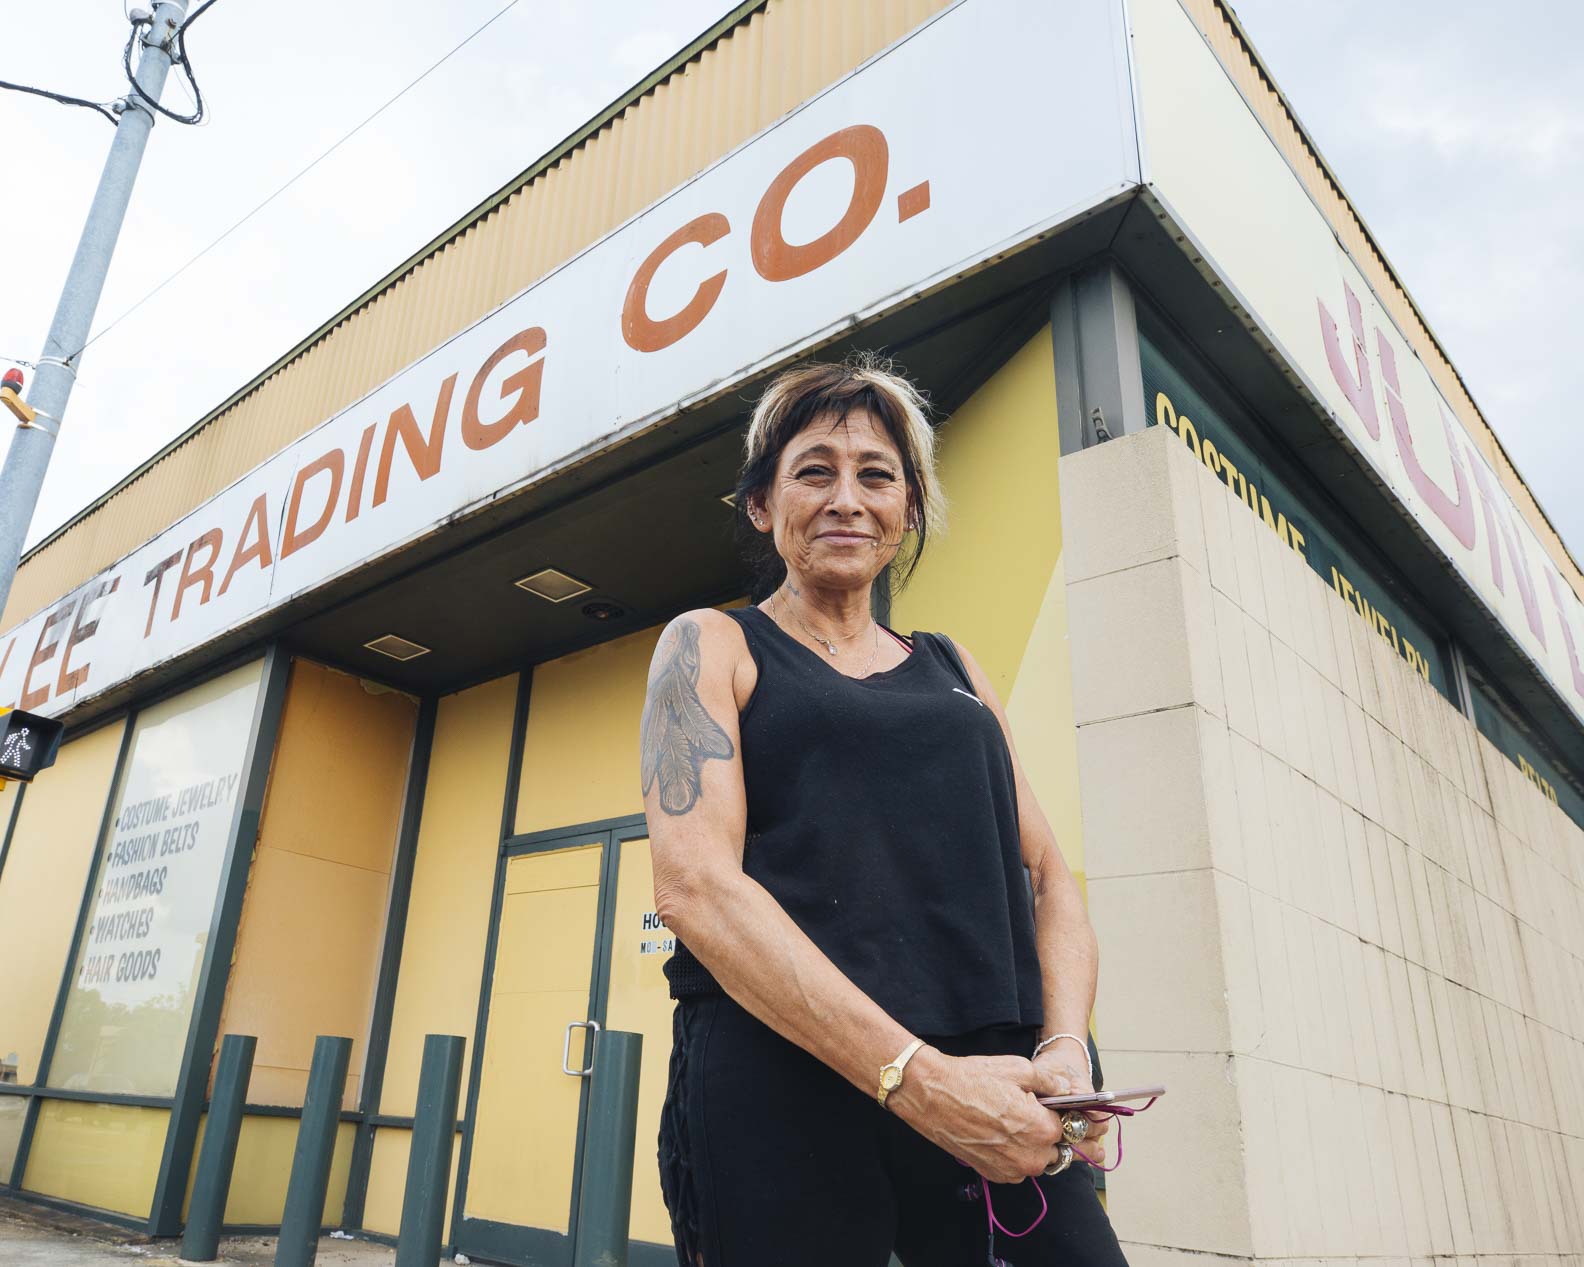 Heights resident Deborah Nahinu stands in front of Jun Lee Trading Co., a staple at Summer and National for more than 30 years. (Ziggy Mac)